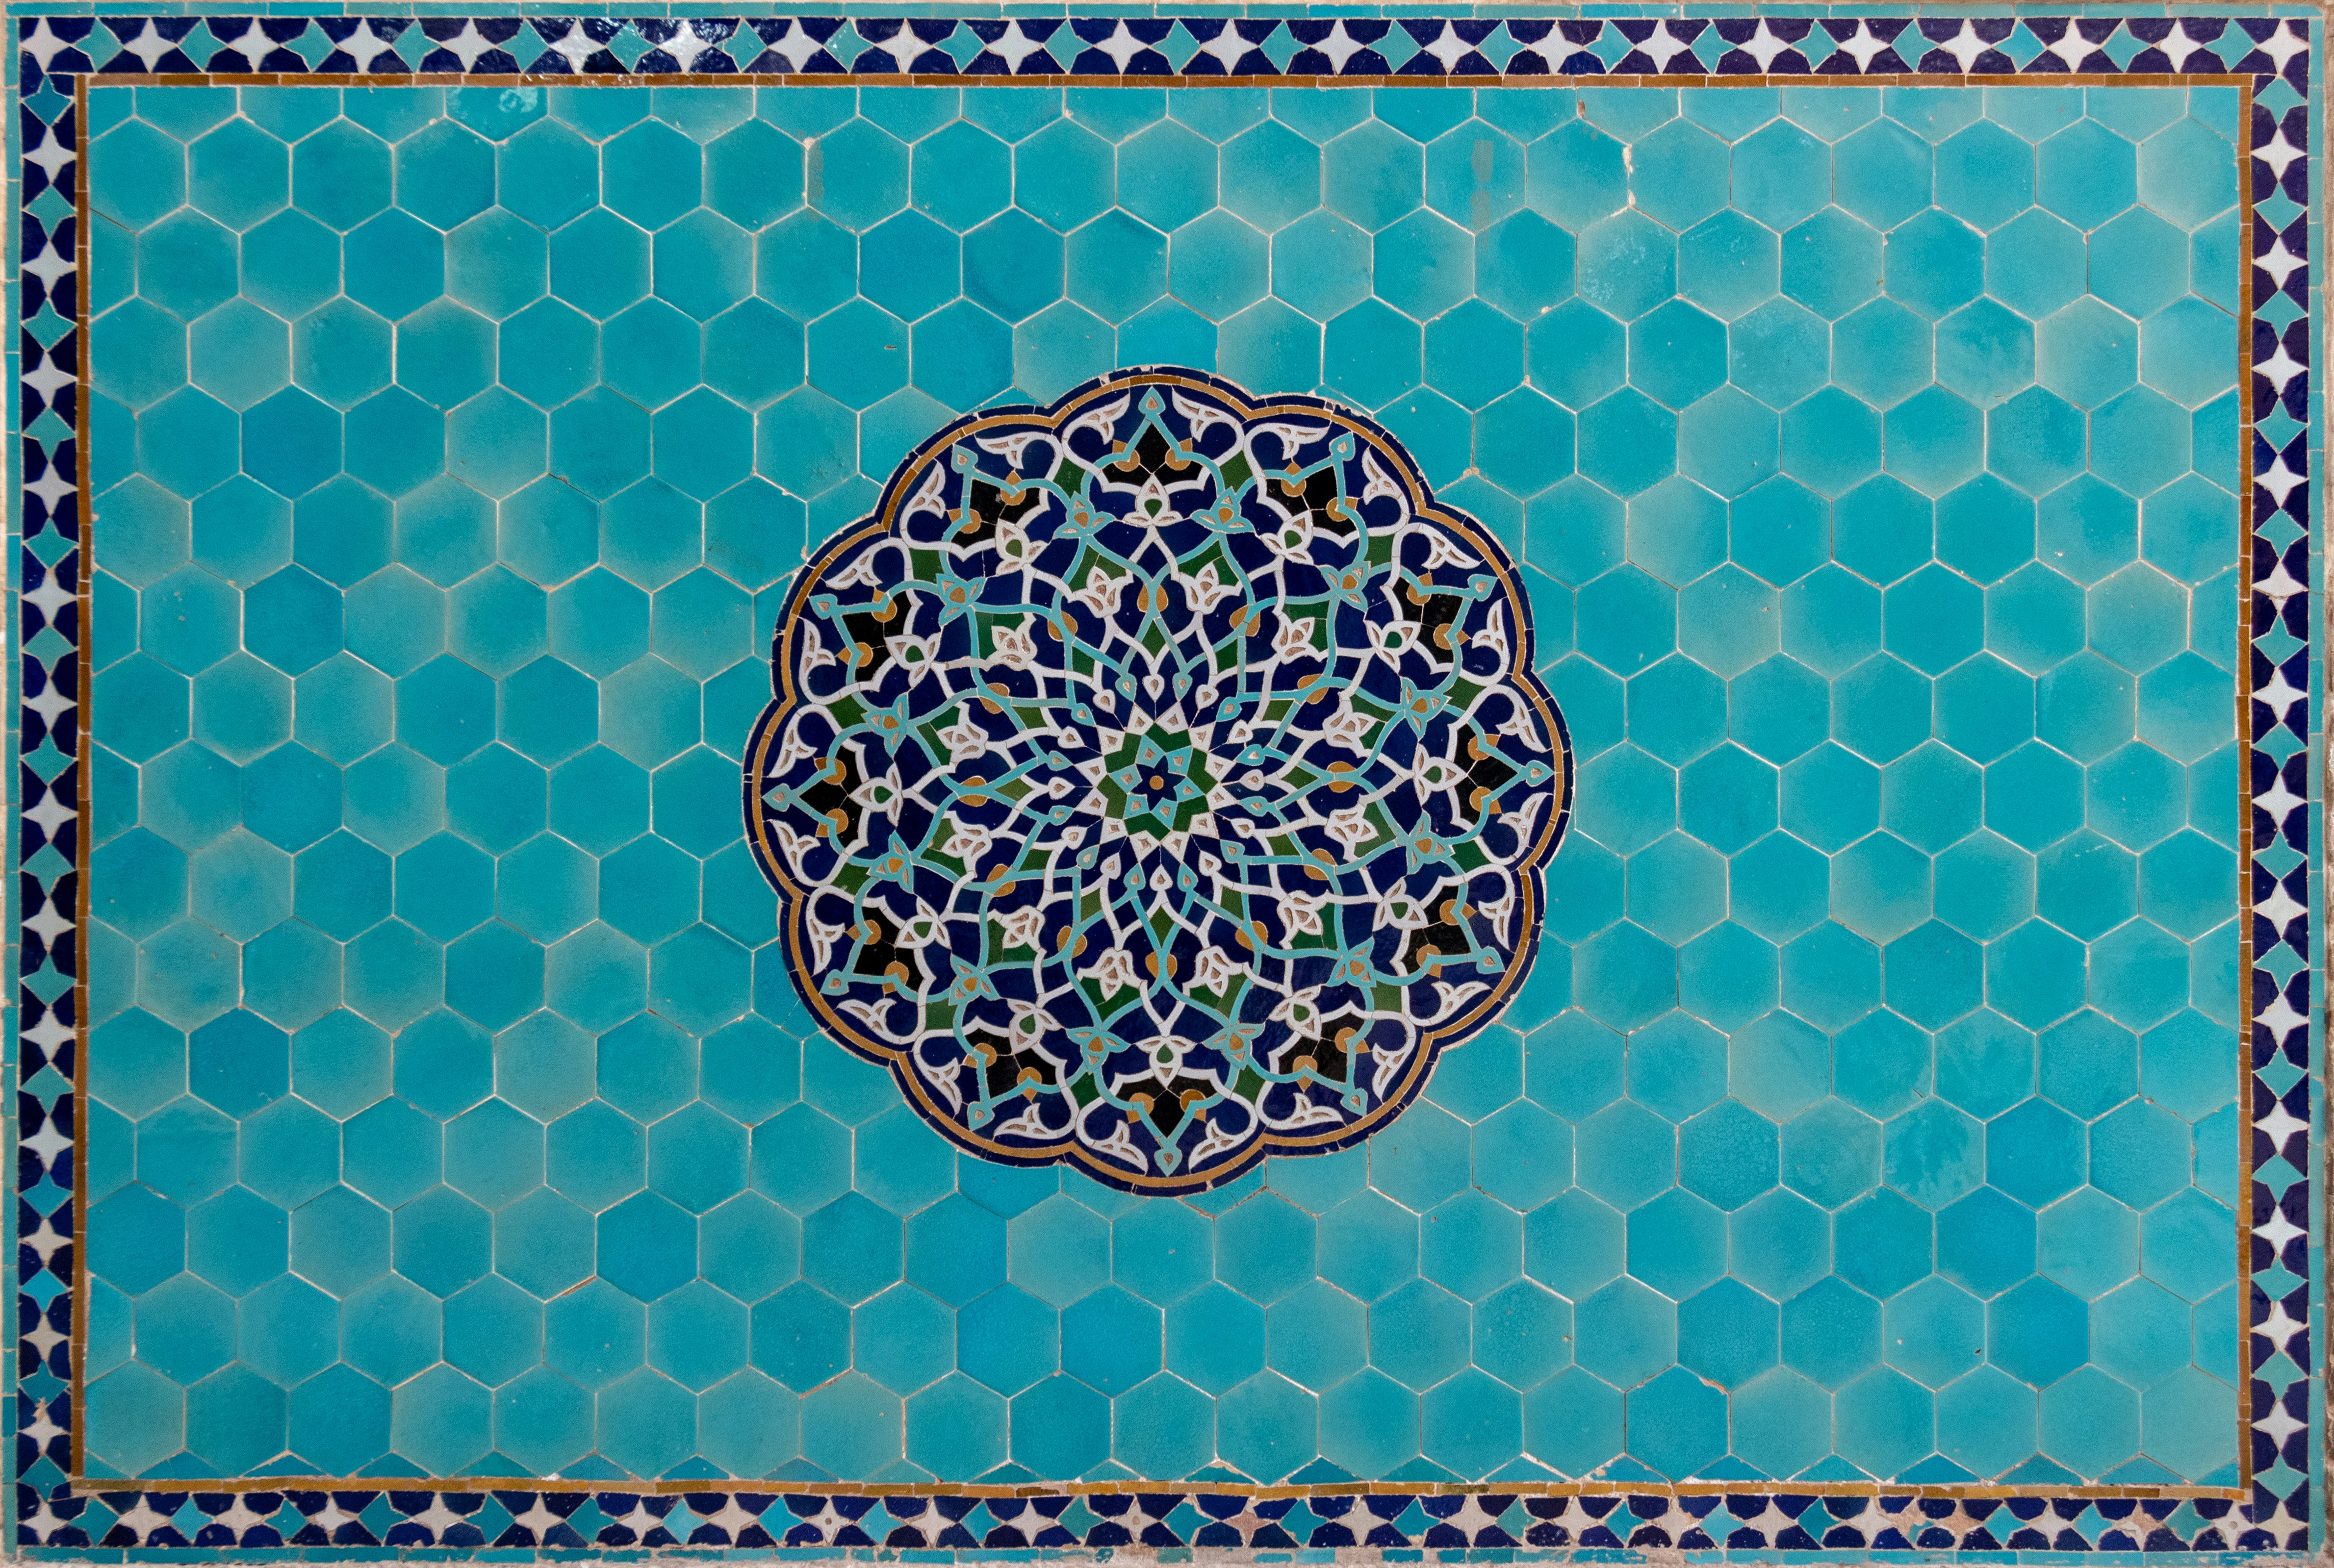 Blue Tiles of Jame Mosque in Yazd, Iran